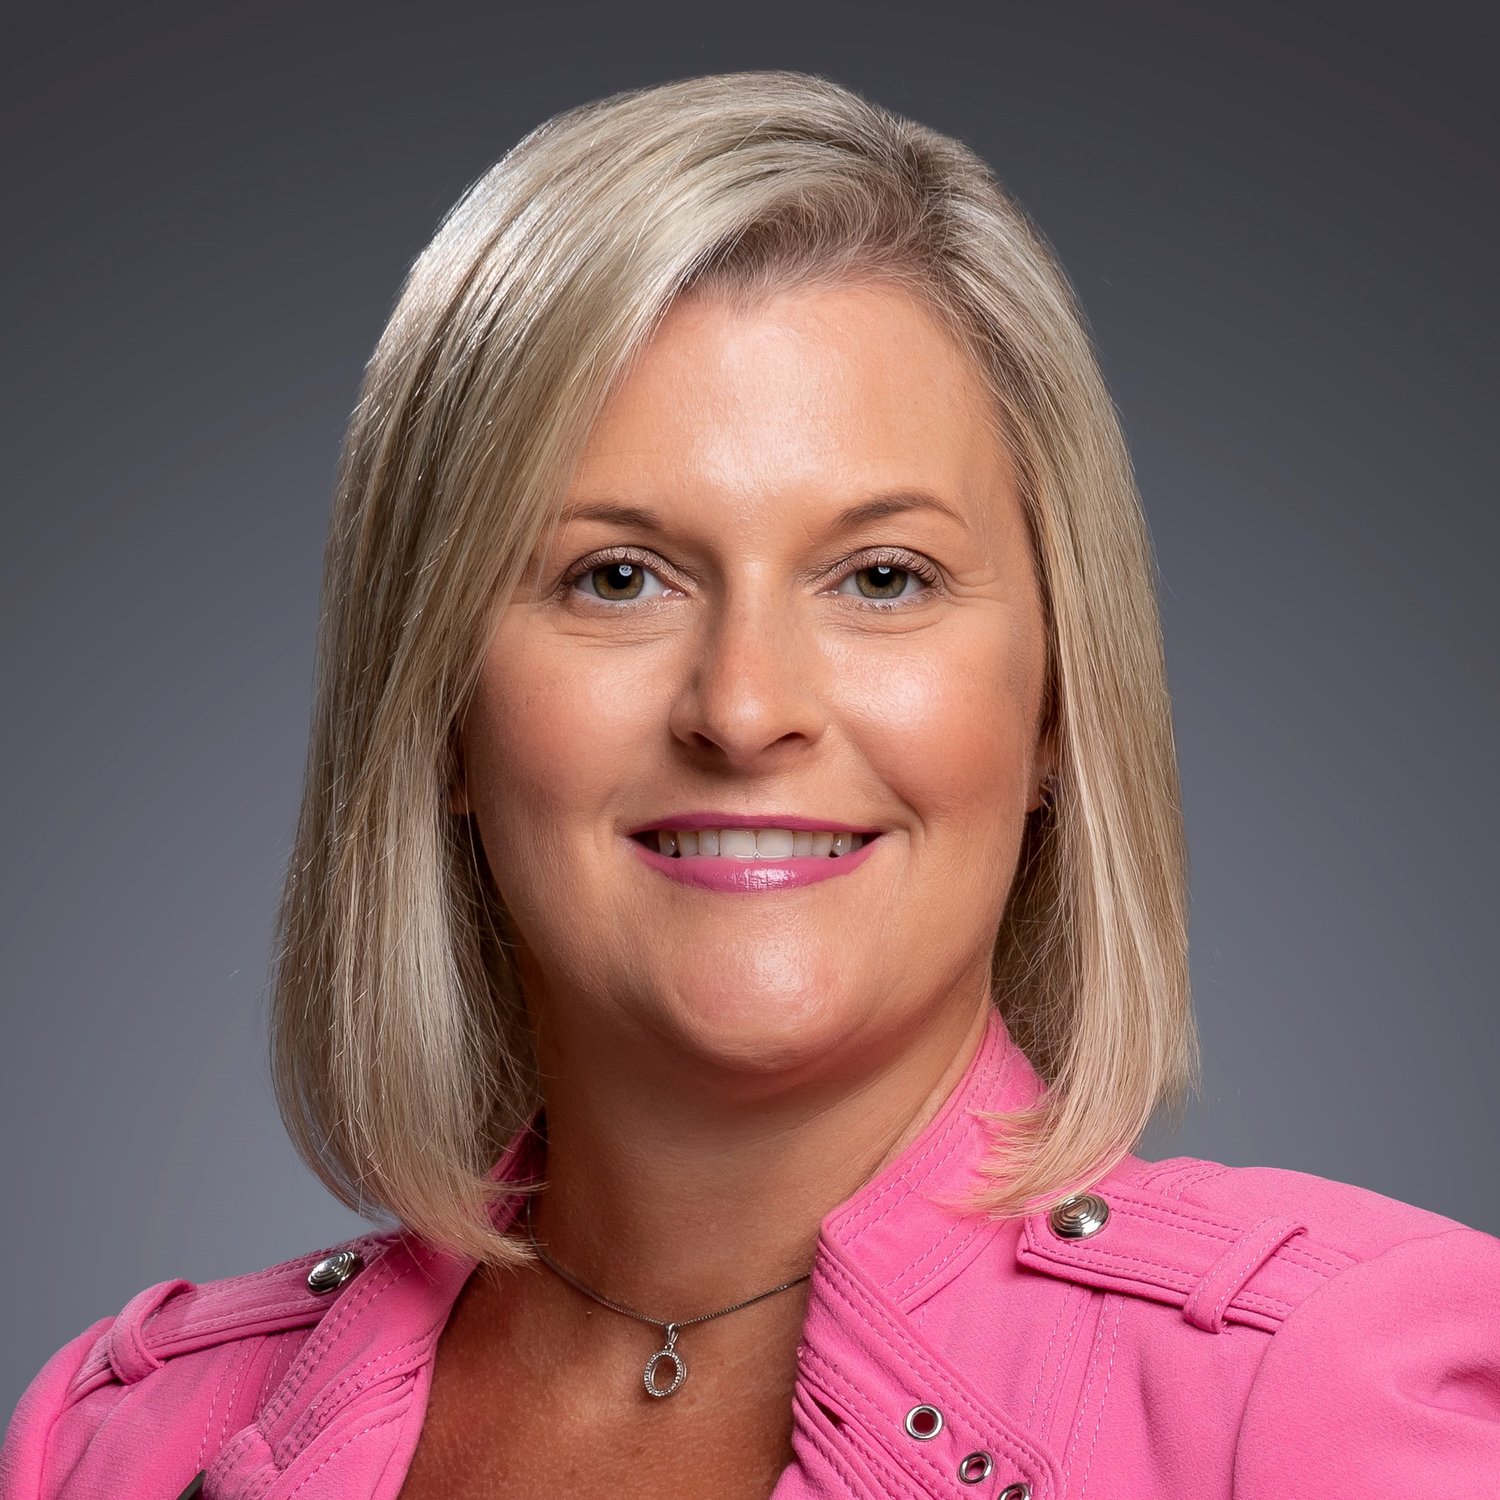 Angie Brady, the director of tourism marketing for the Fayetteville Area Convention & Visitors Bureau, has been selected as the North Carolina representative on the Southeast Tourism Society board.